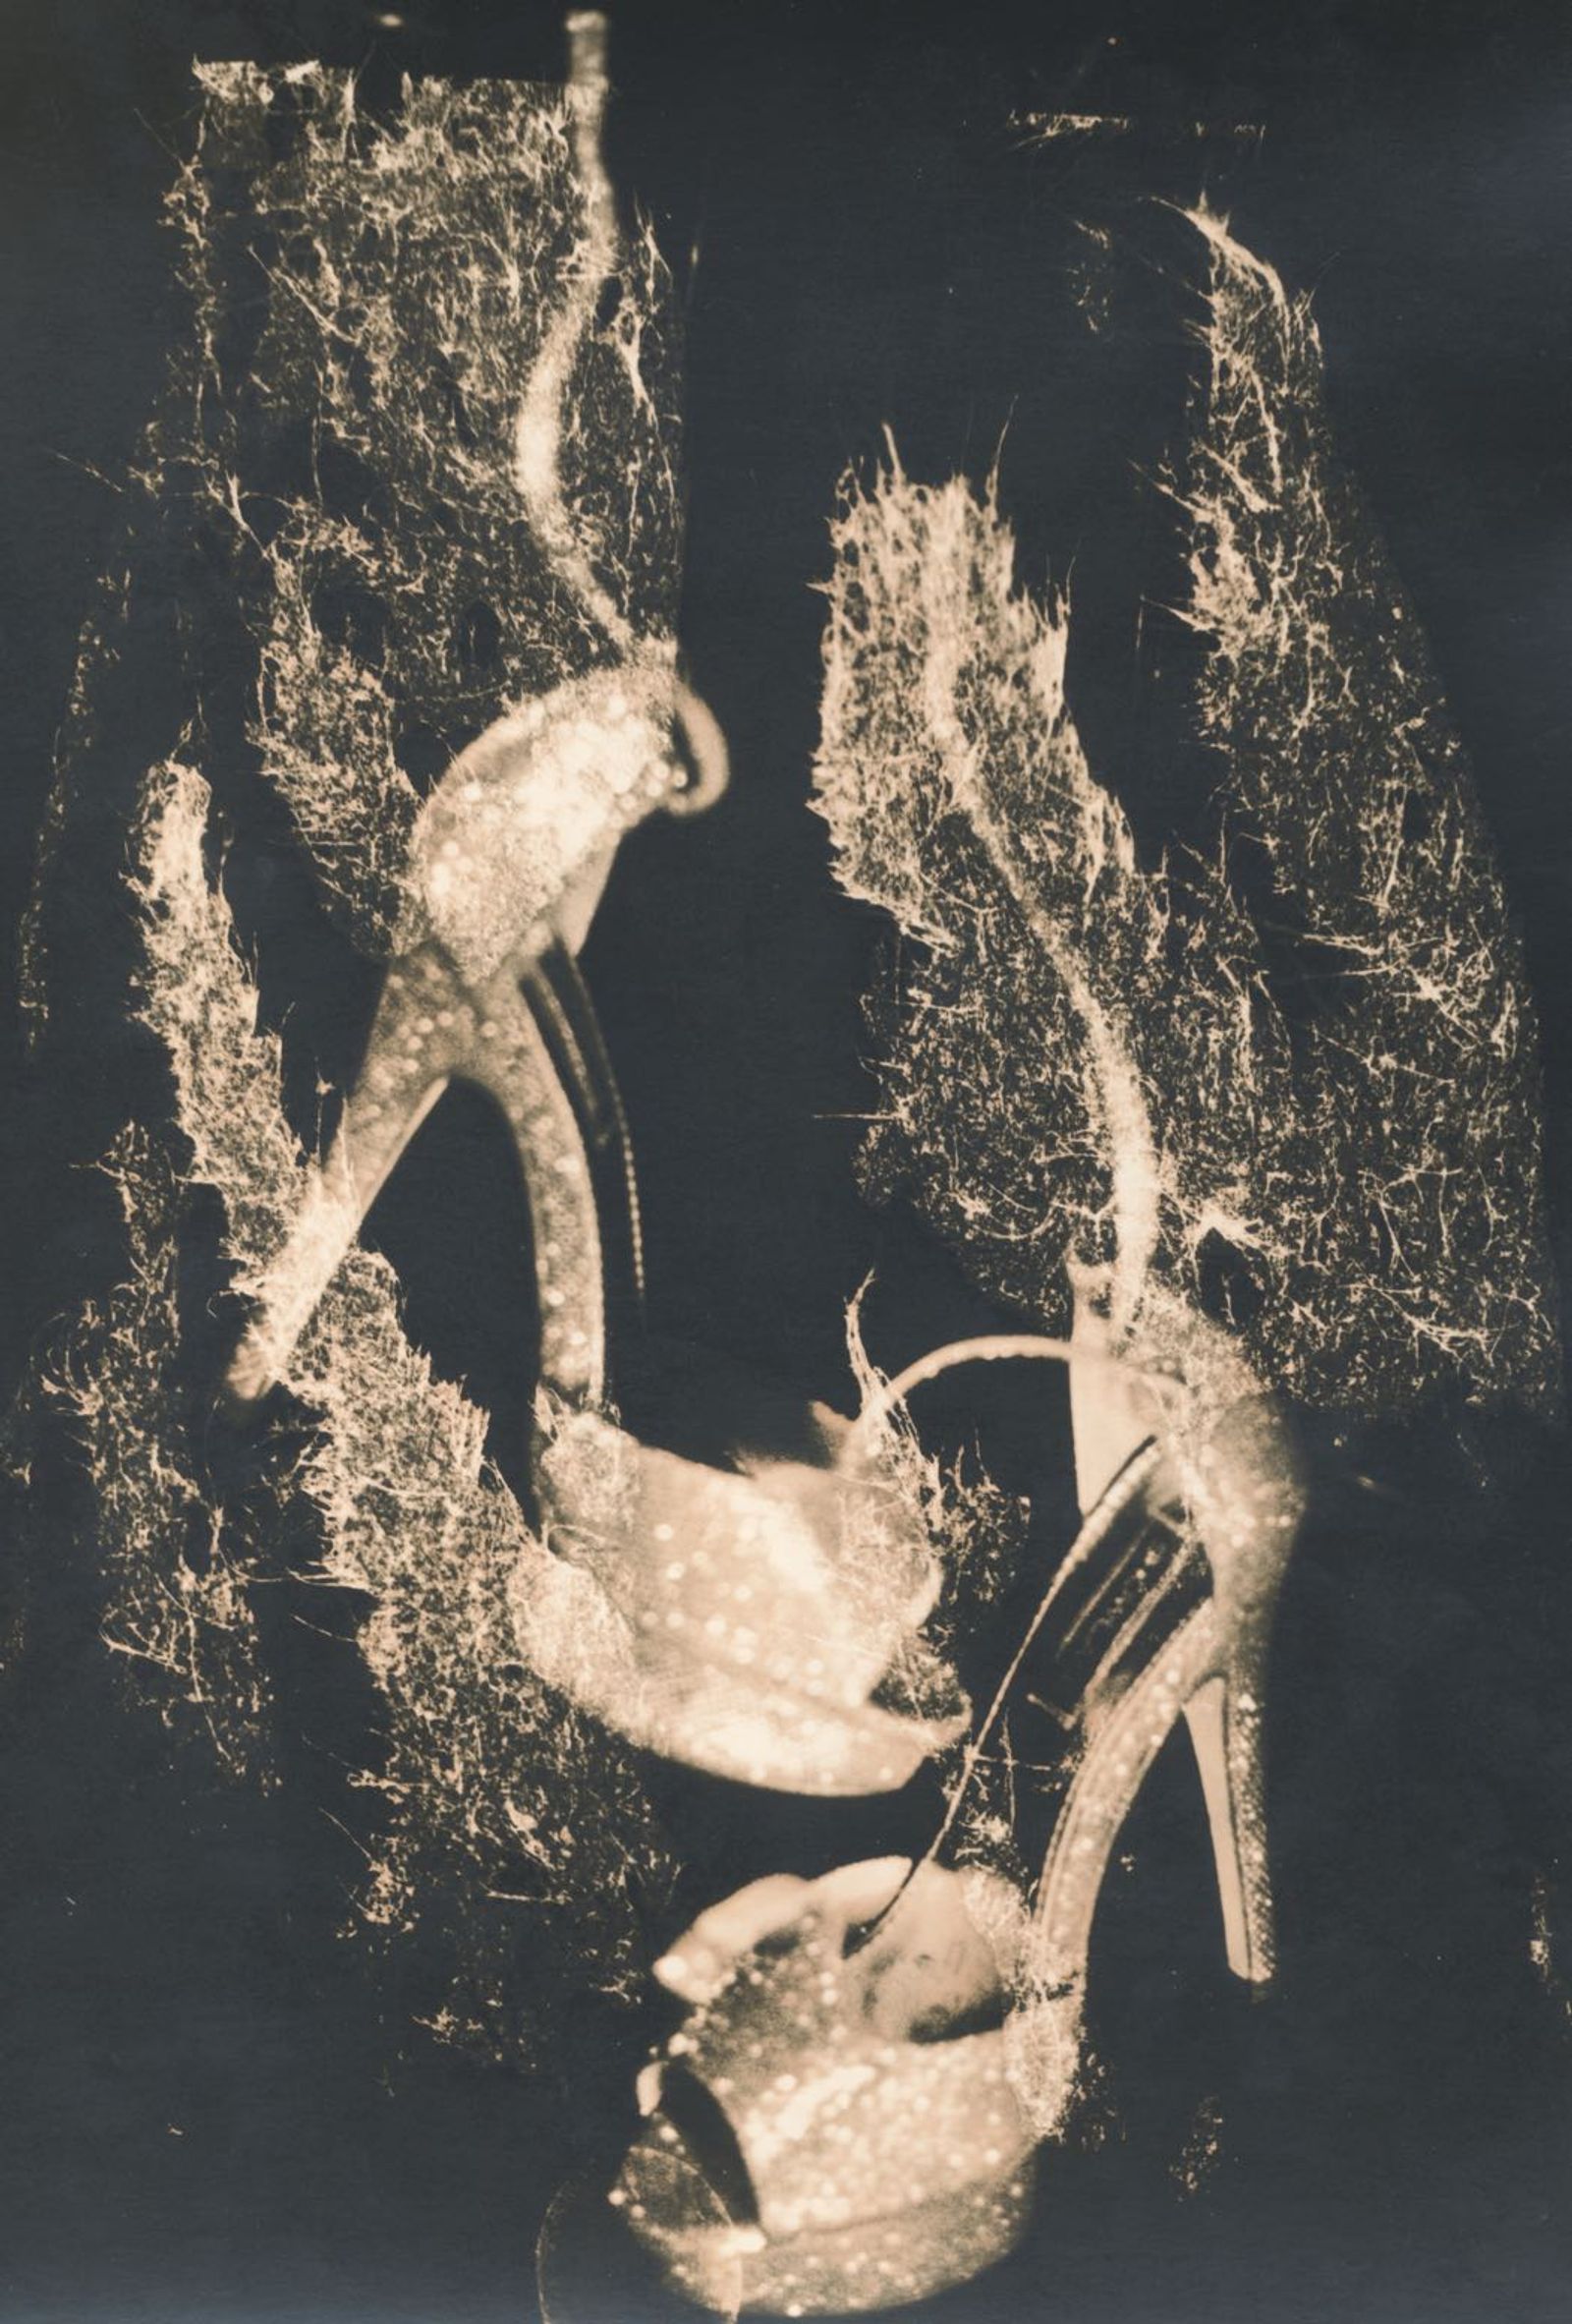 © Jo Stapleton - Impossible shoes with tissue paper wings (Lith print with tissue paper distressed neg)